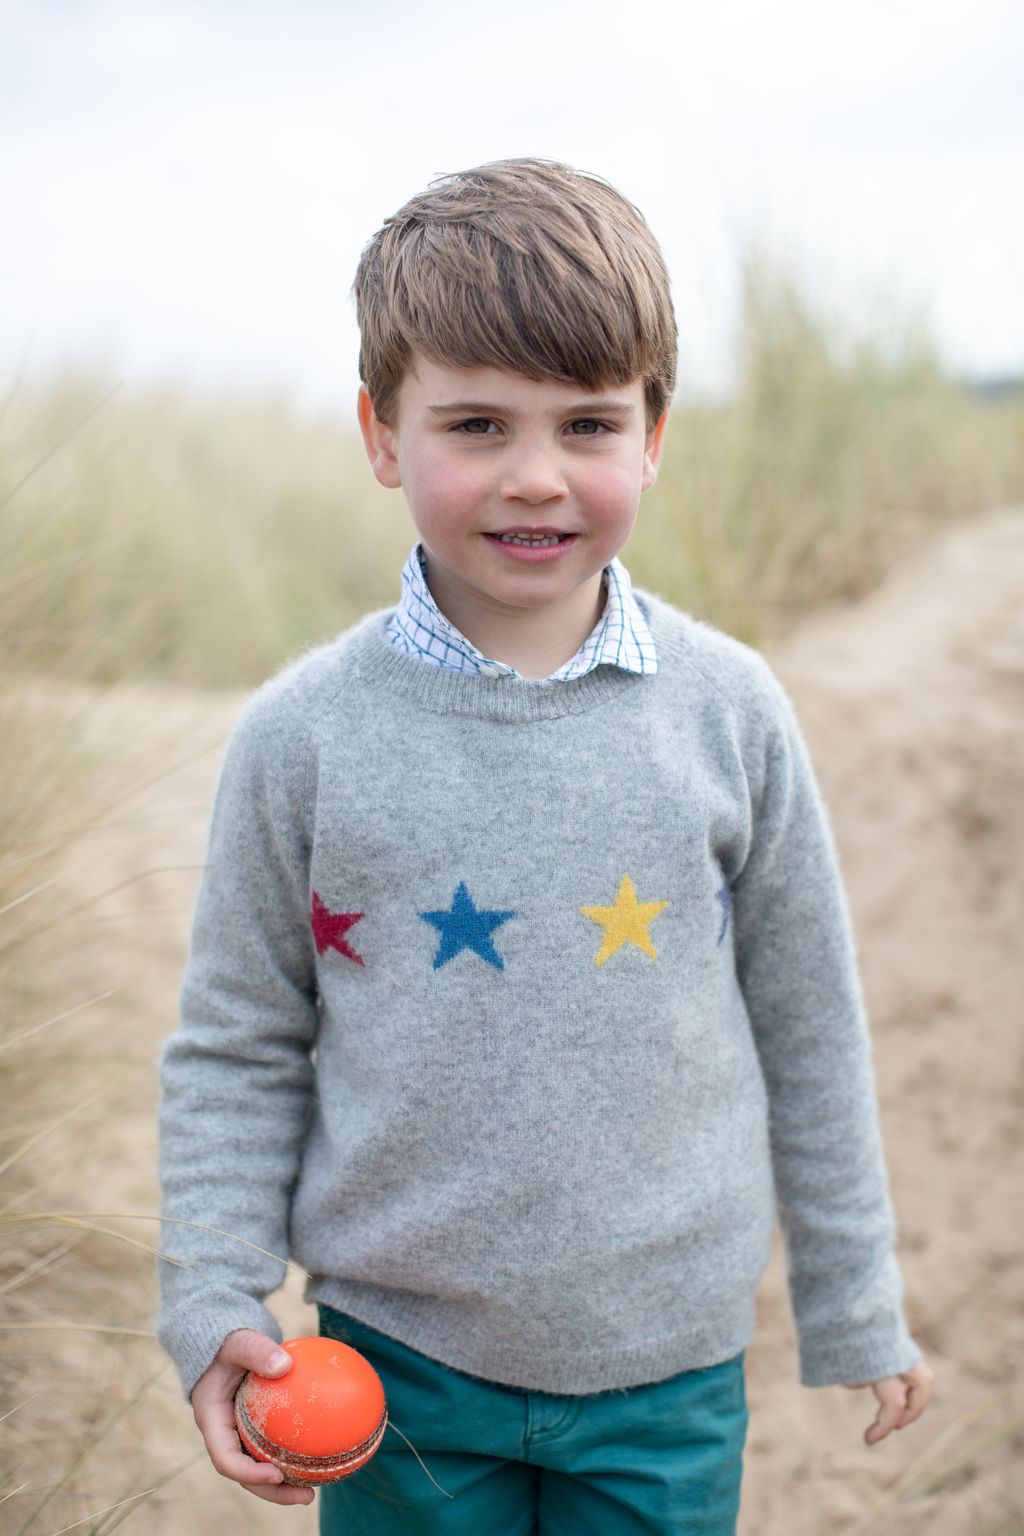 This undated photo provided by Kensington Palace shows Britain's Prince Louis ahead of his fourth birthday on Saturday, April 23, 2022. The photograph was taken earlier this month in Norfolk, England, by his mother, Kate, the Duchess of Cambridge. (The Duchess of Cambridge/Kensington Palace via AP)